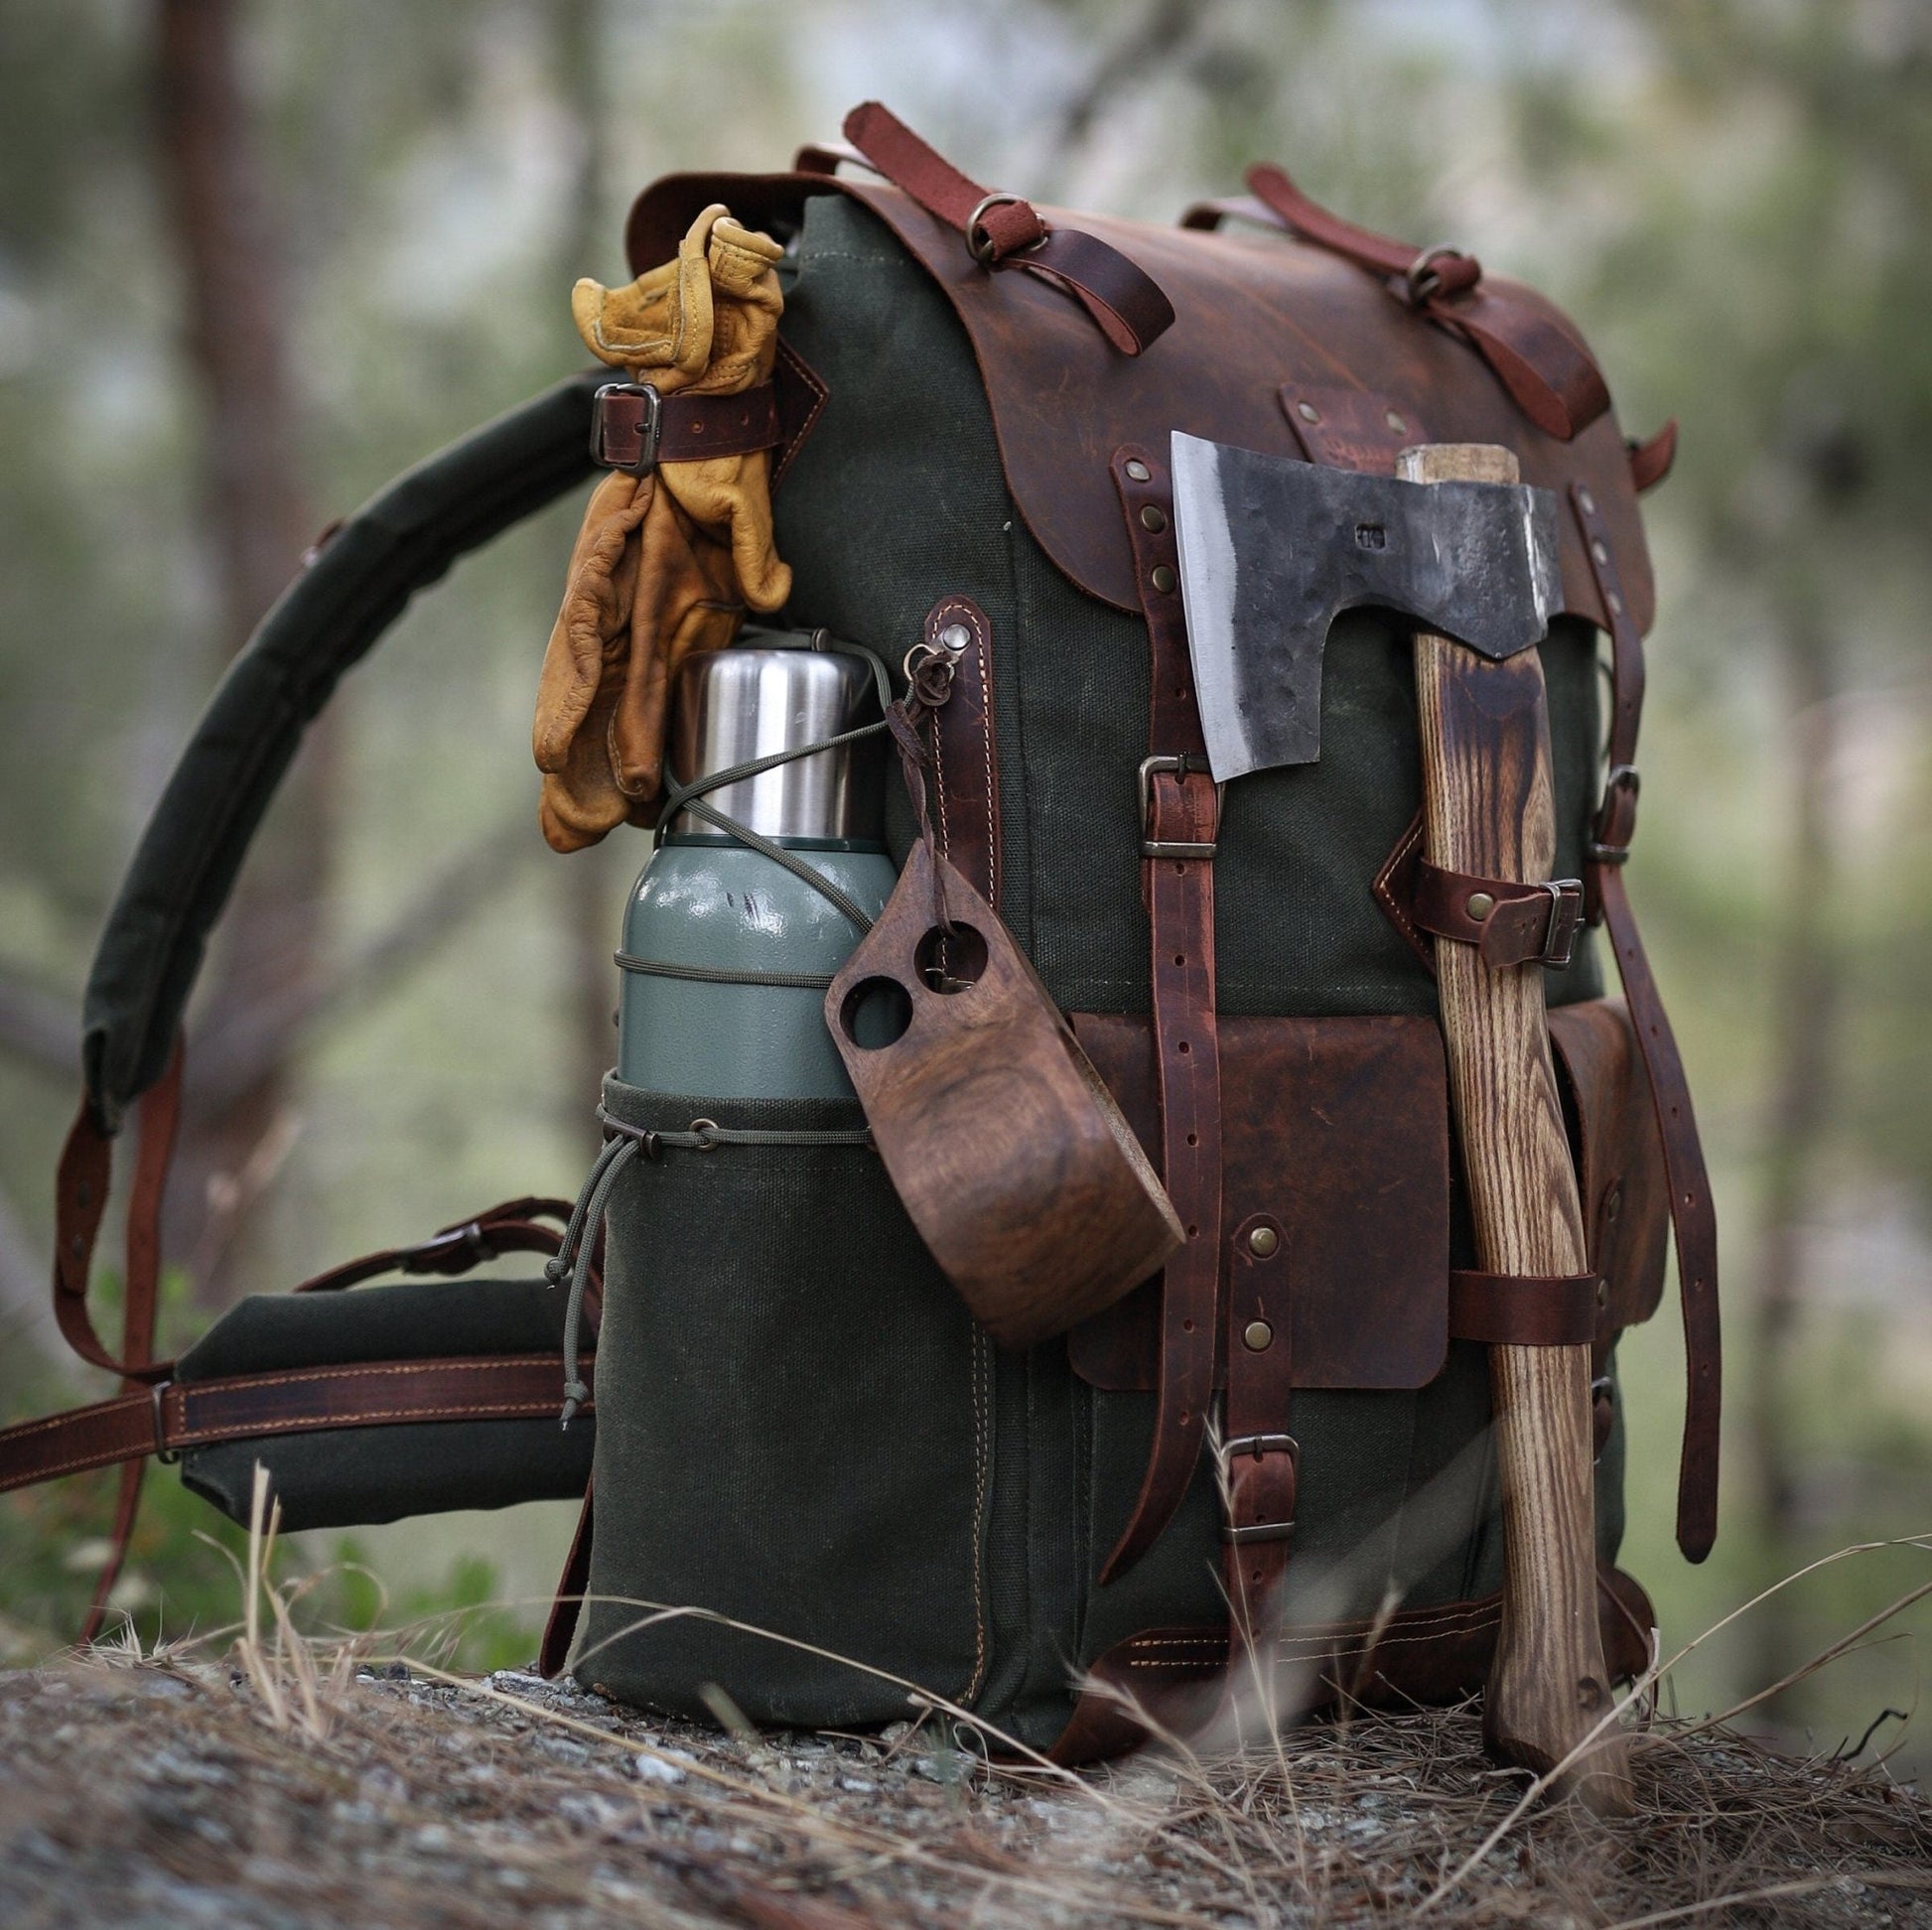 80L to 30L Size Options | Extra large | Handmade | Leather | Waxed Canvas Backpack | Camping, Hunting, Bushcraft, Travel | Personalization Backpack,rucksack 99percenthandmade 30 Green 